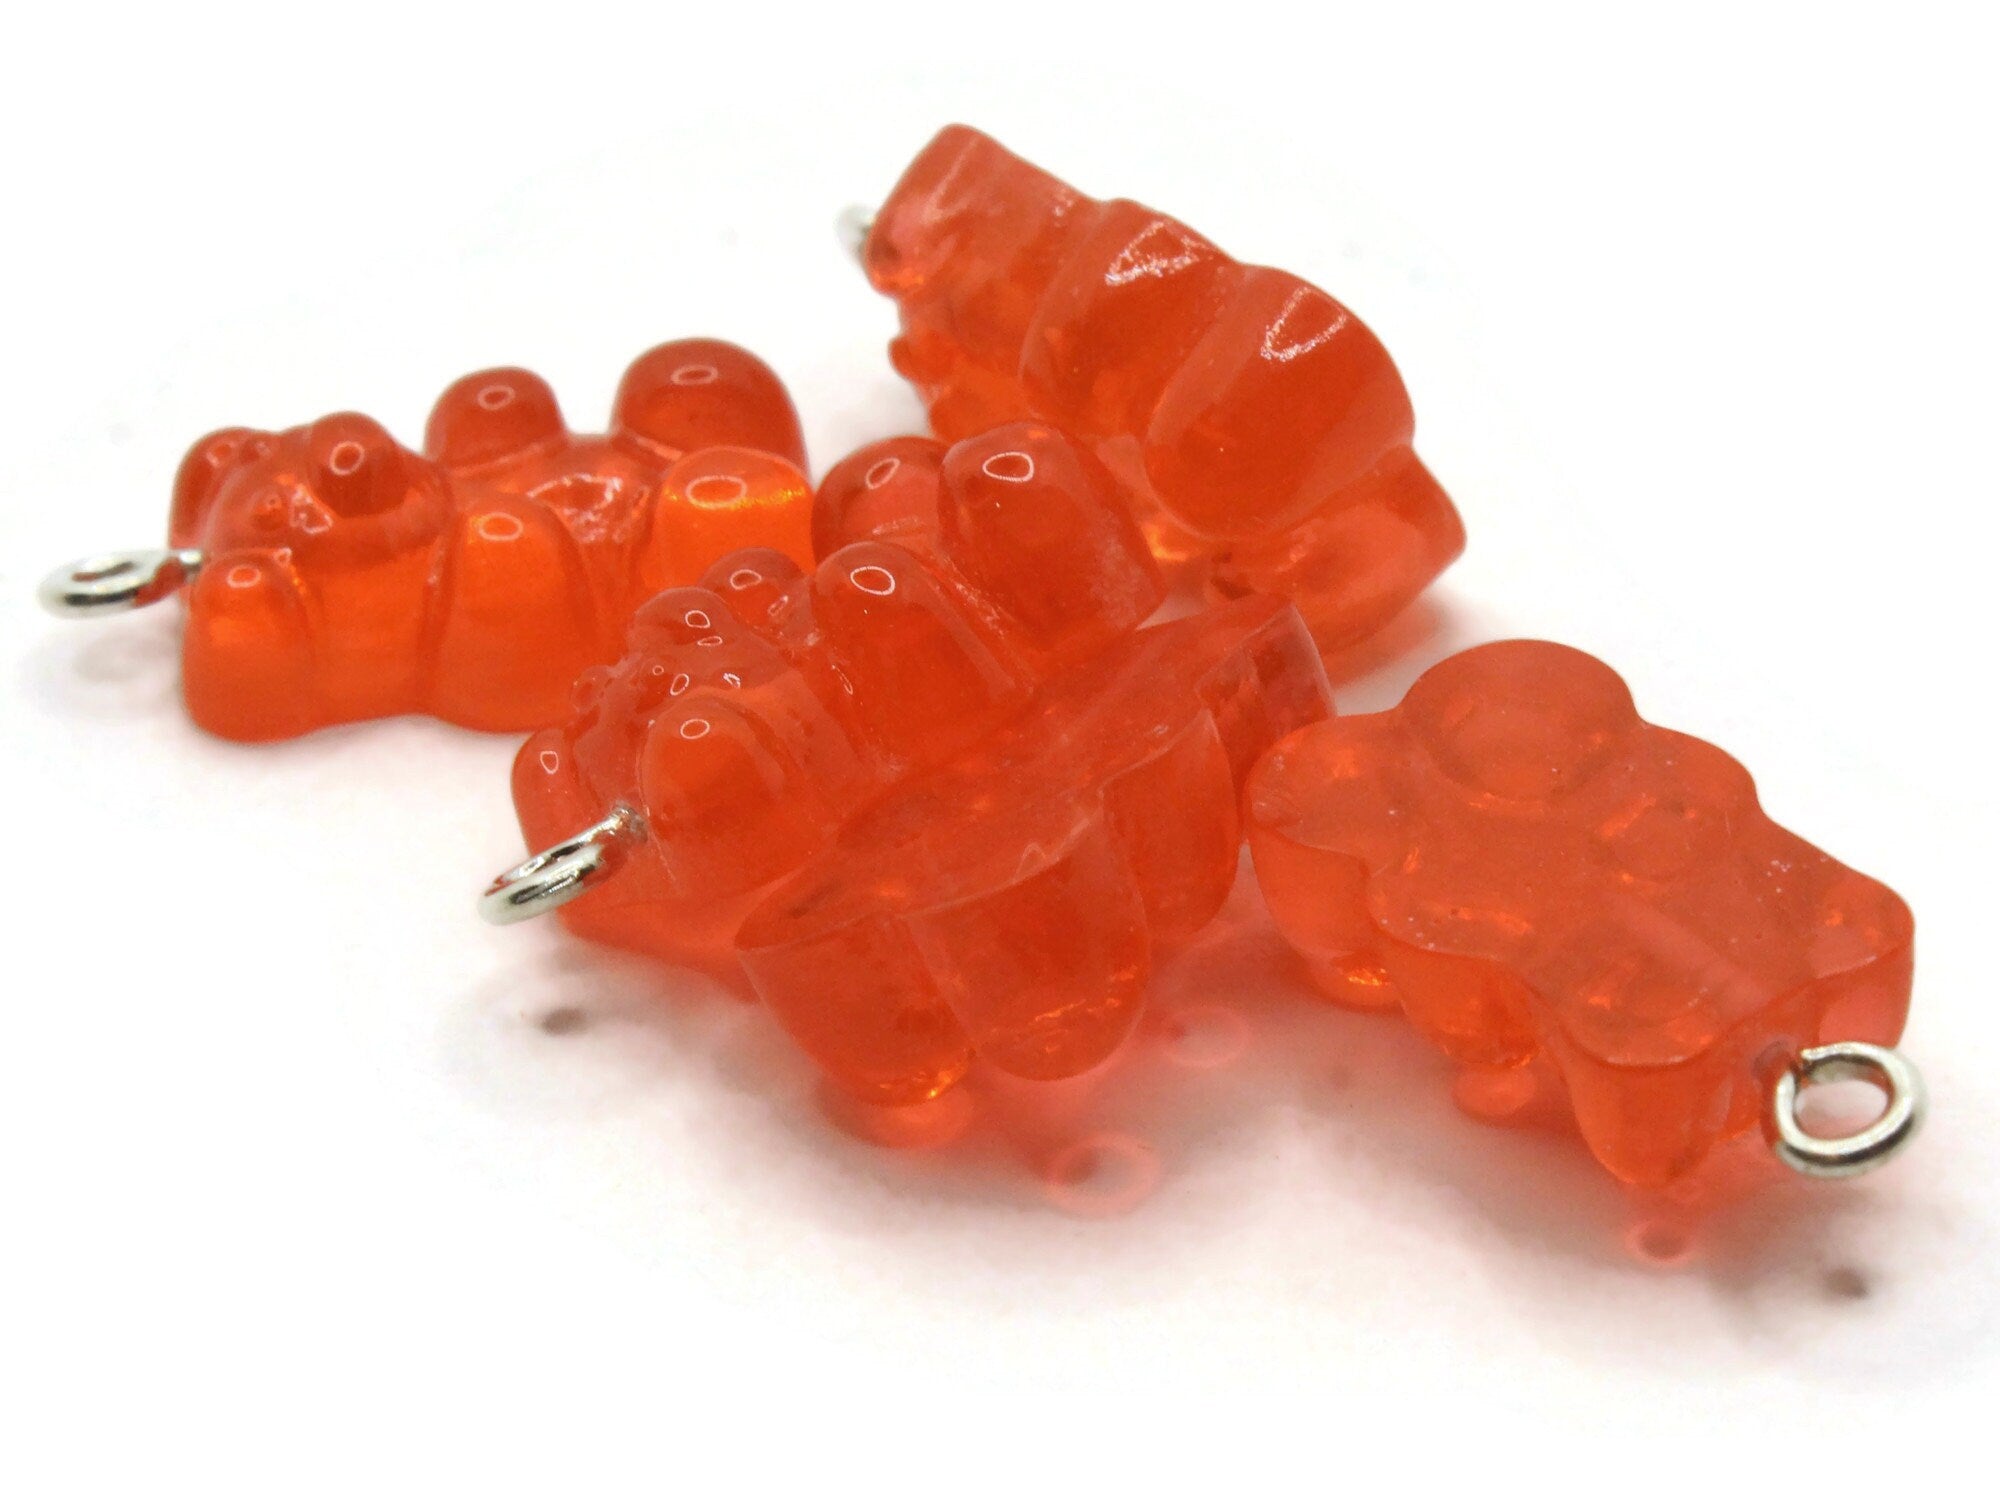 5 20mm Green Resin Gummy Bear Charms by Smileyboy Beads | Michaels